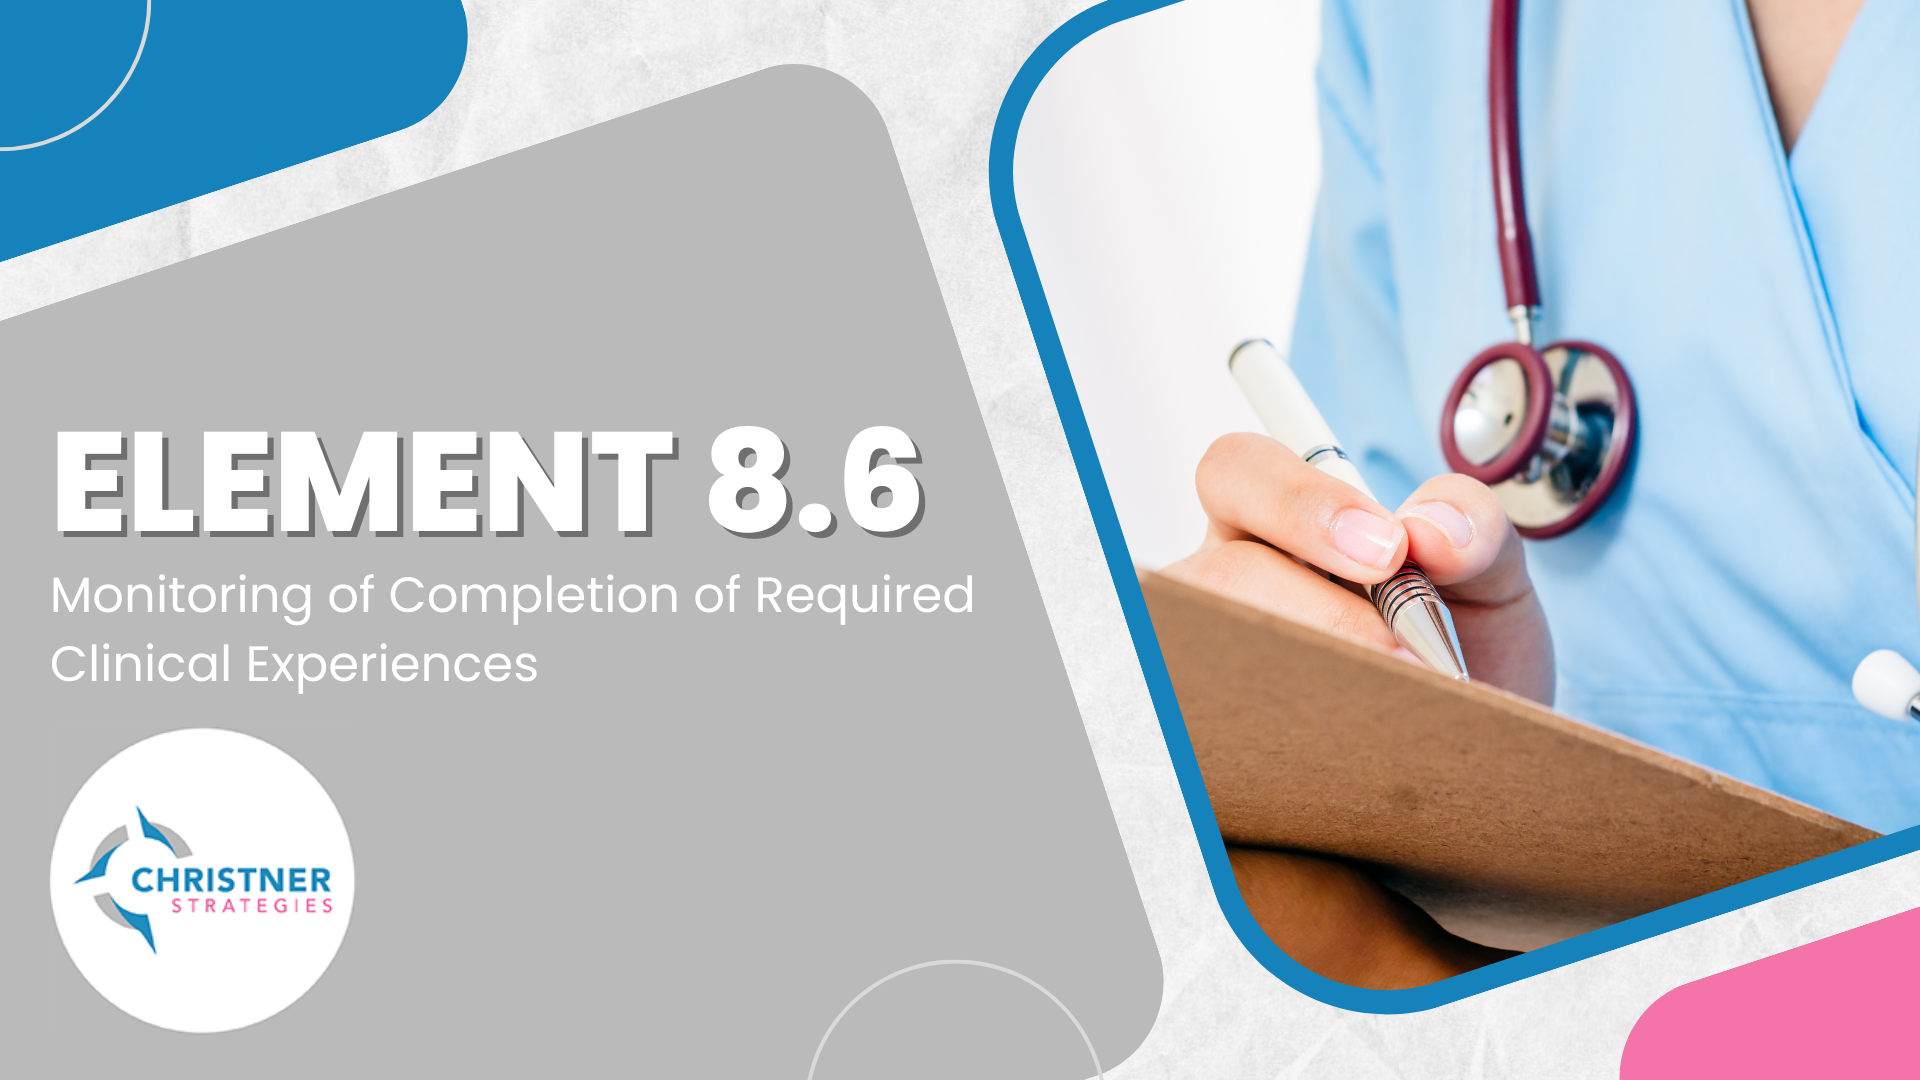 LCME Element 8.6 - Monitoring of Completion of Required Clinical Experiences